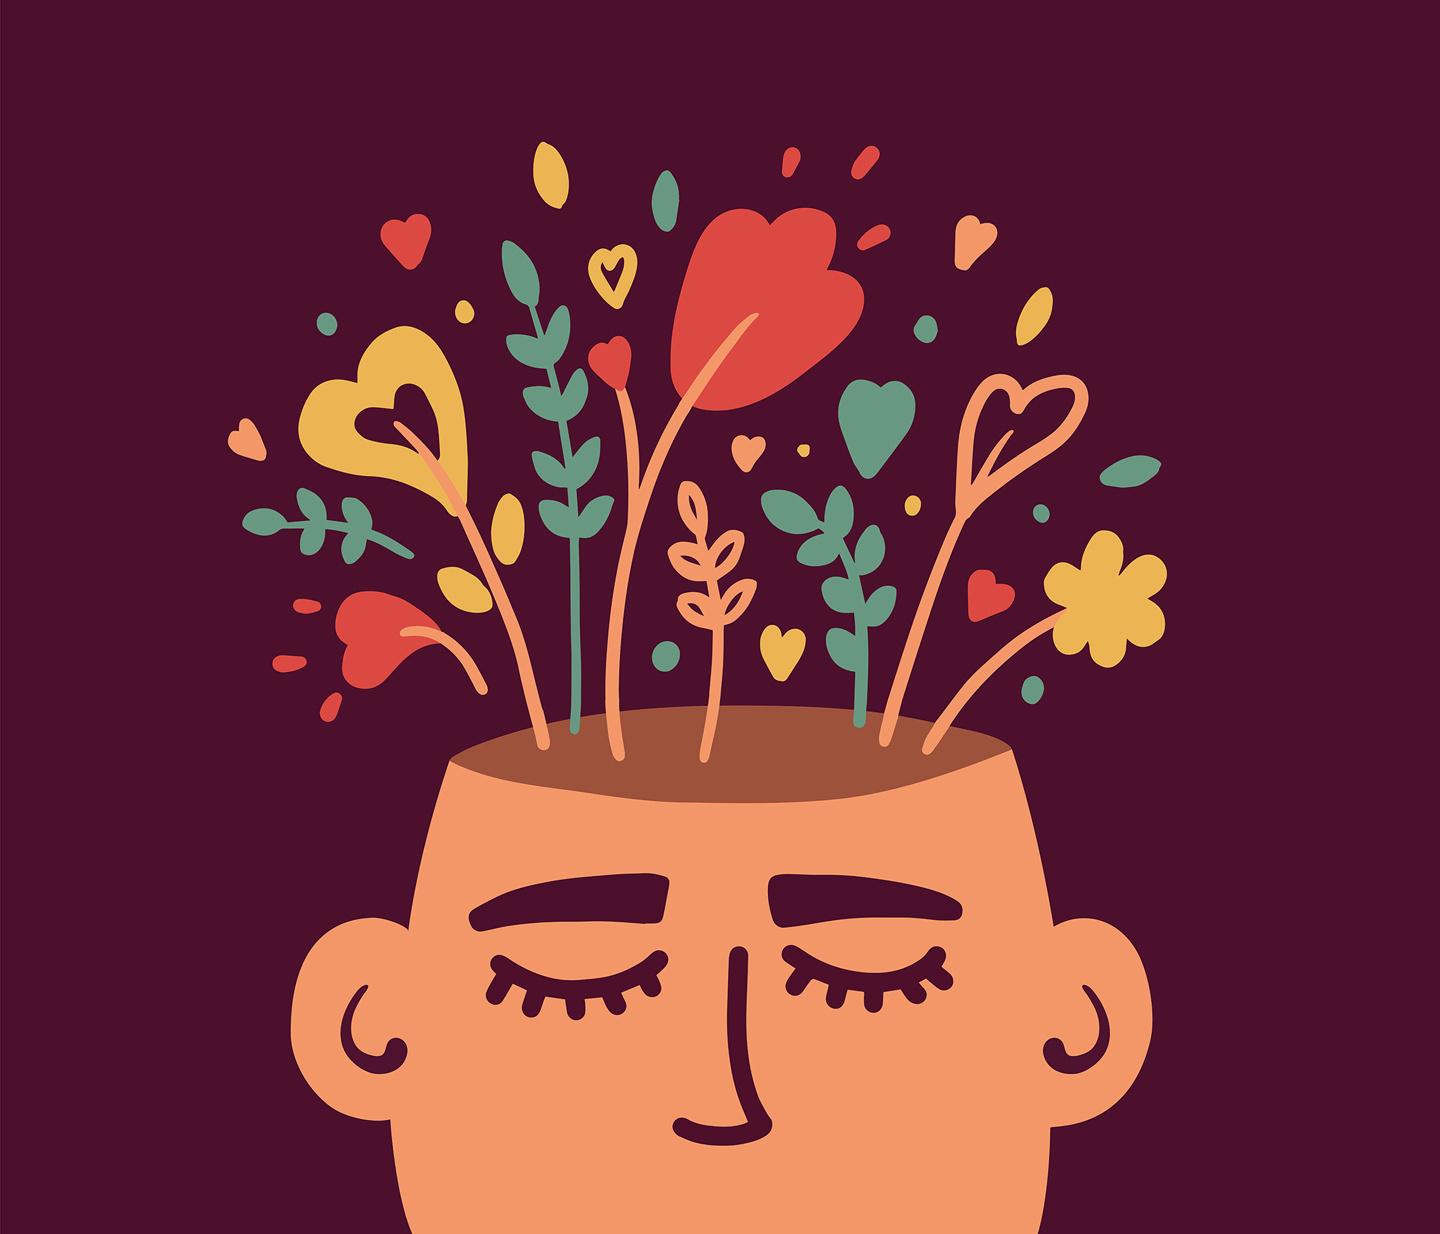 graphic of human head with flowers growing from inside